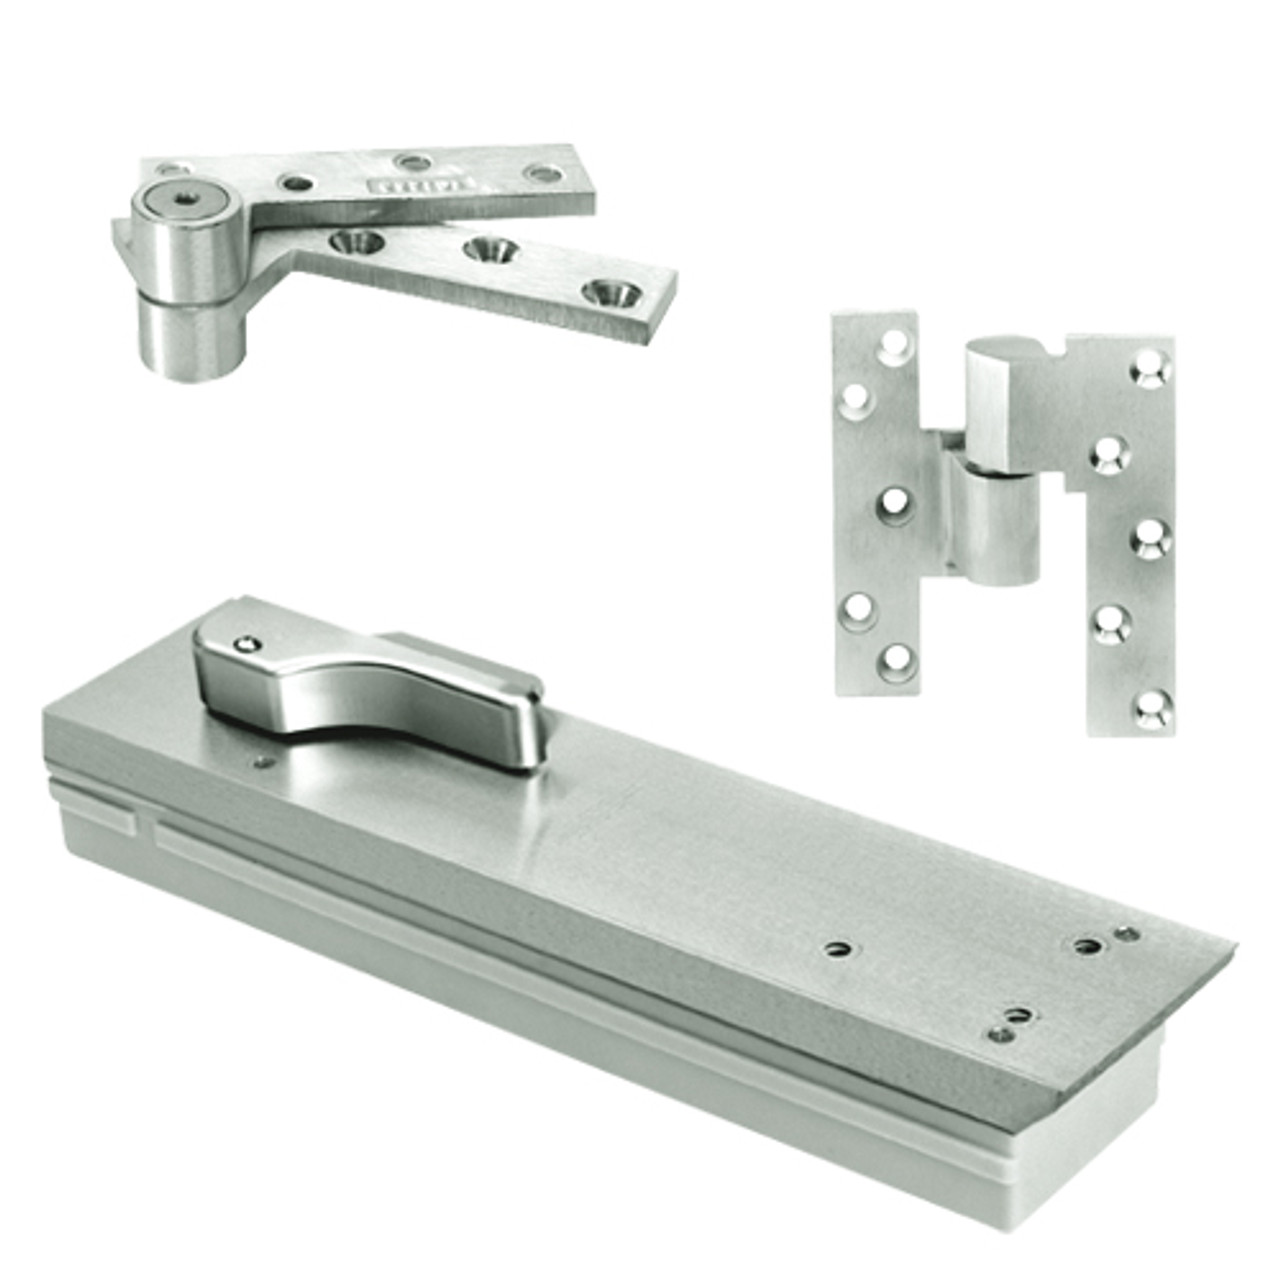 QT5104ABC90-LH-618 Rixson Q51 Series 3/4" Offset Hung Shallow Depth Floor Closers in Bright Nickel Finish